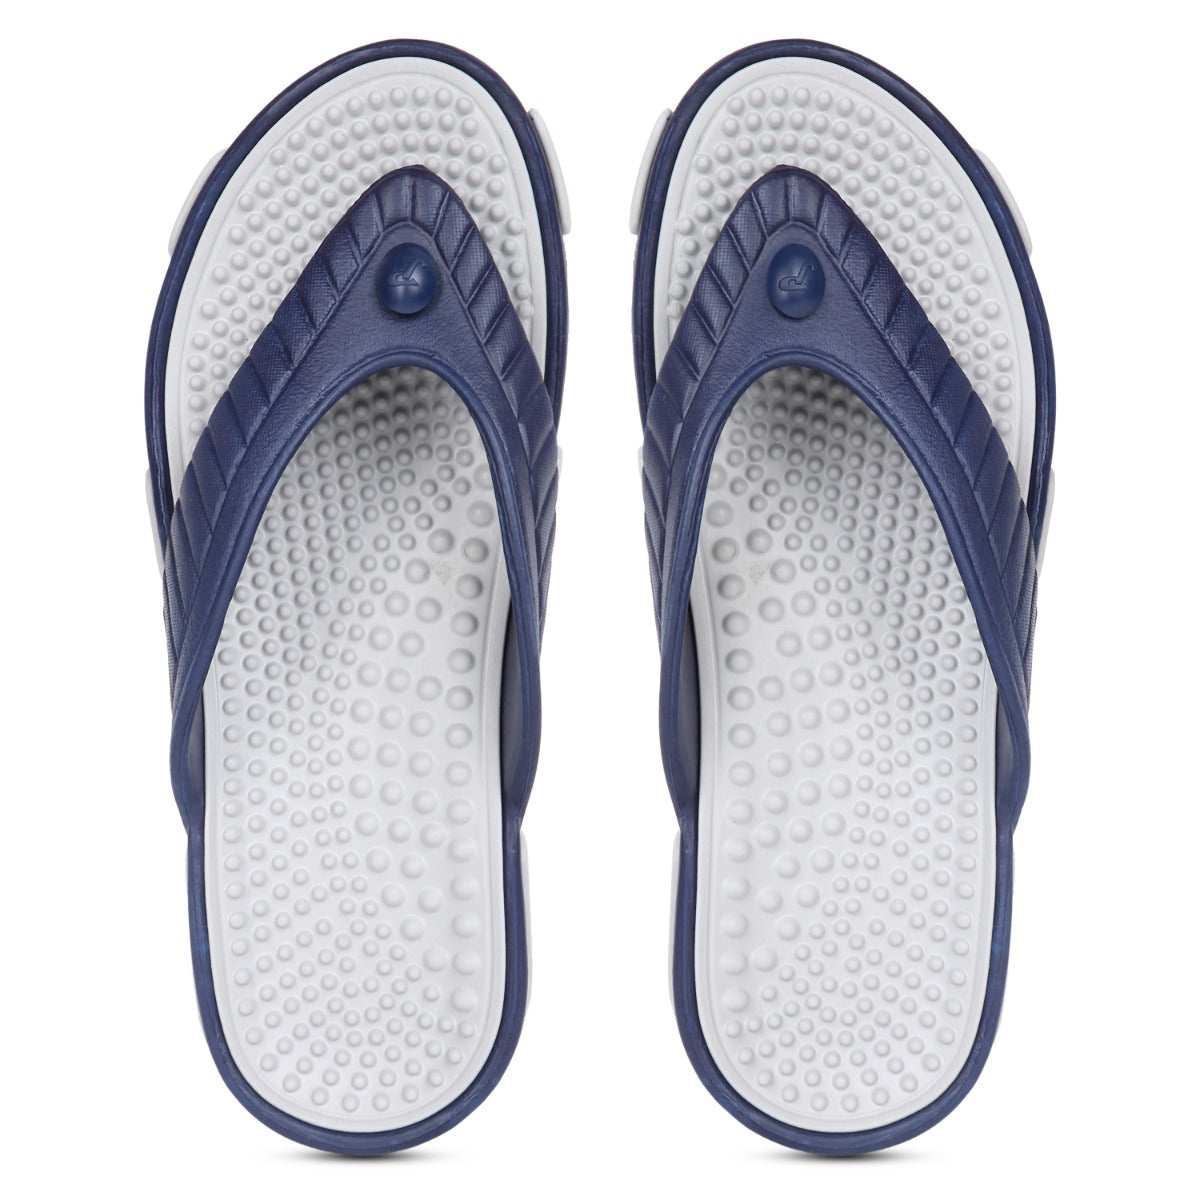 Paragon EVK3404G Men Stylish Lightweight Flipflops | Comfortable with Anti skid soles | Casual &amp; Trendy Slippers | Indoor &amp; Outdoor